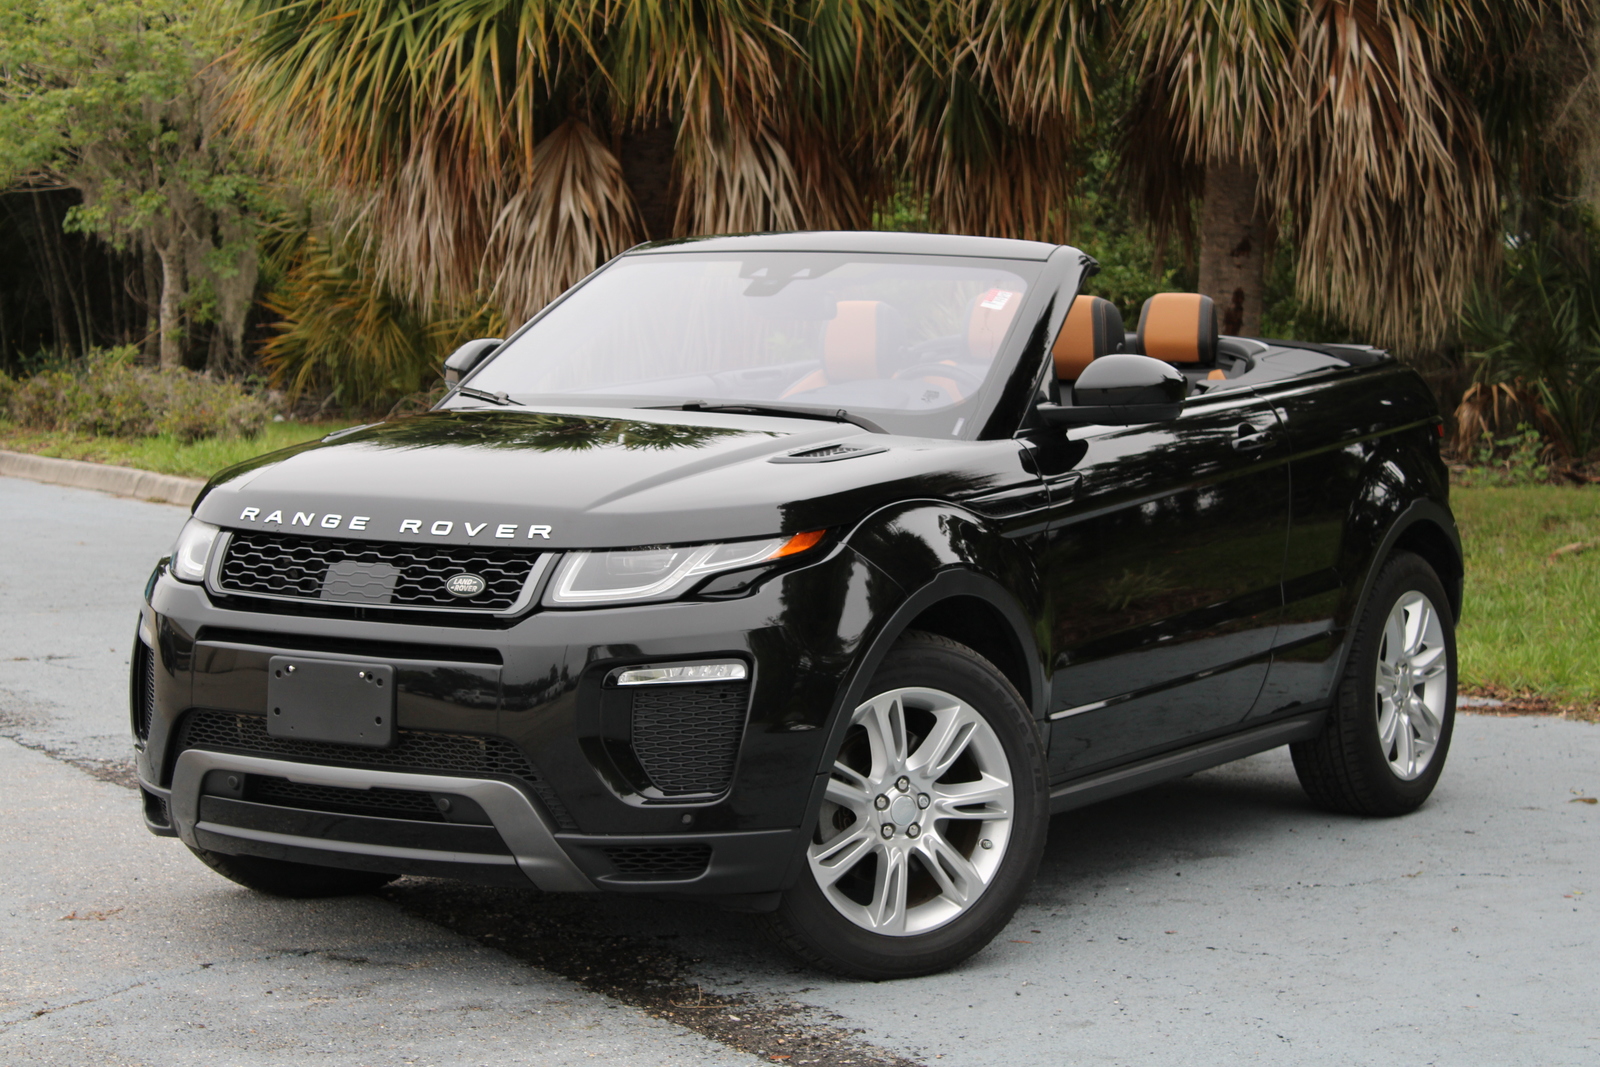 Range Rover Evoque Convertible Pre Owned  . Grained Leather Seats, Front And Rear Parking Sensors And Projected Puddle Lights Featuring A.